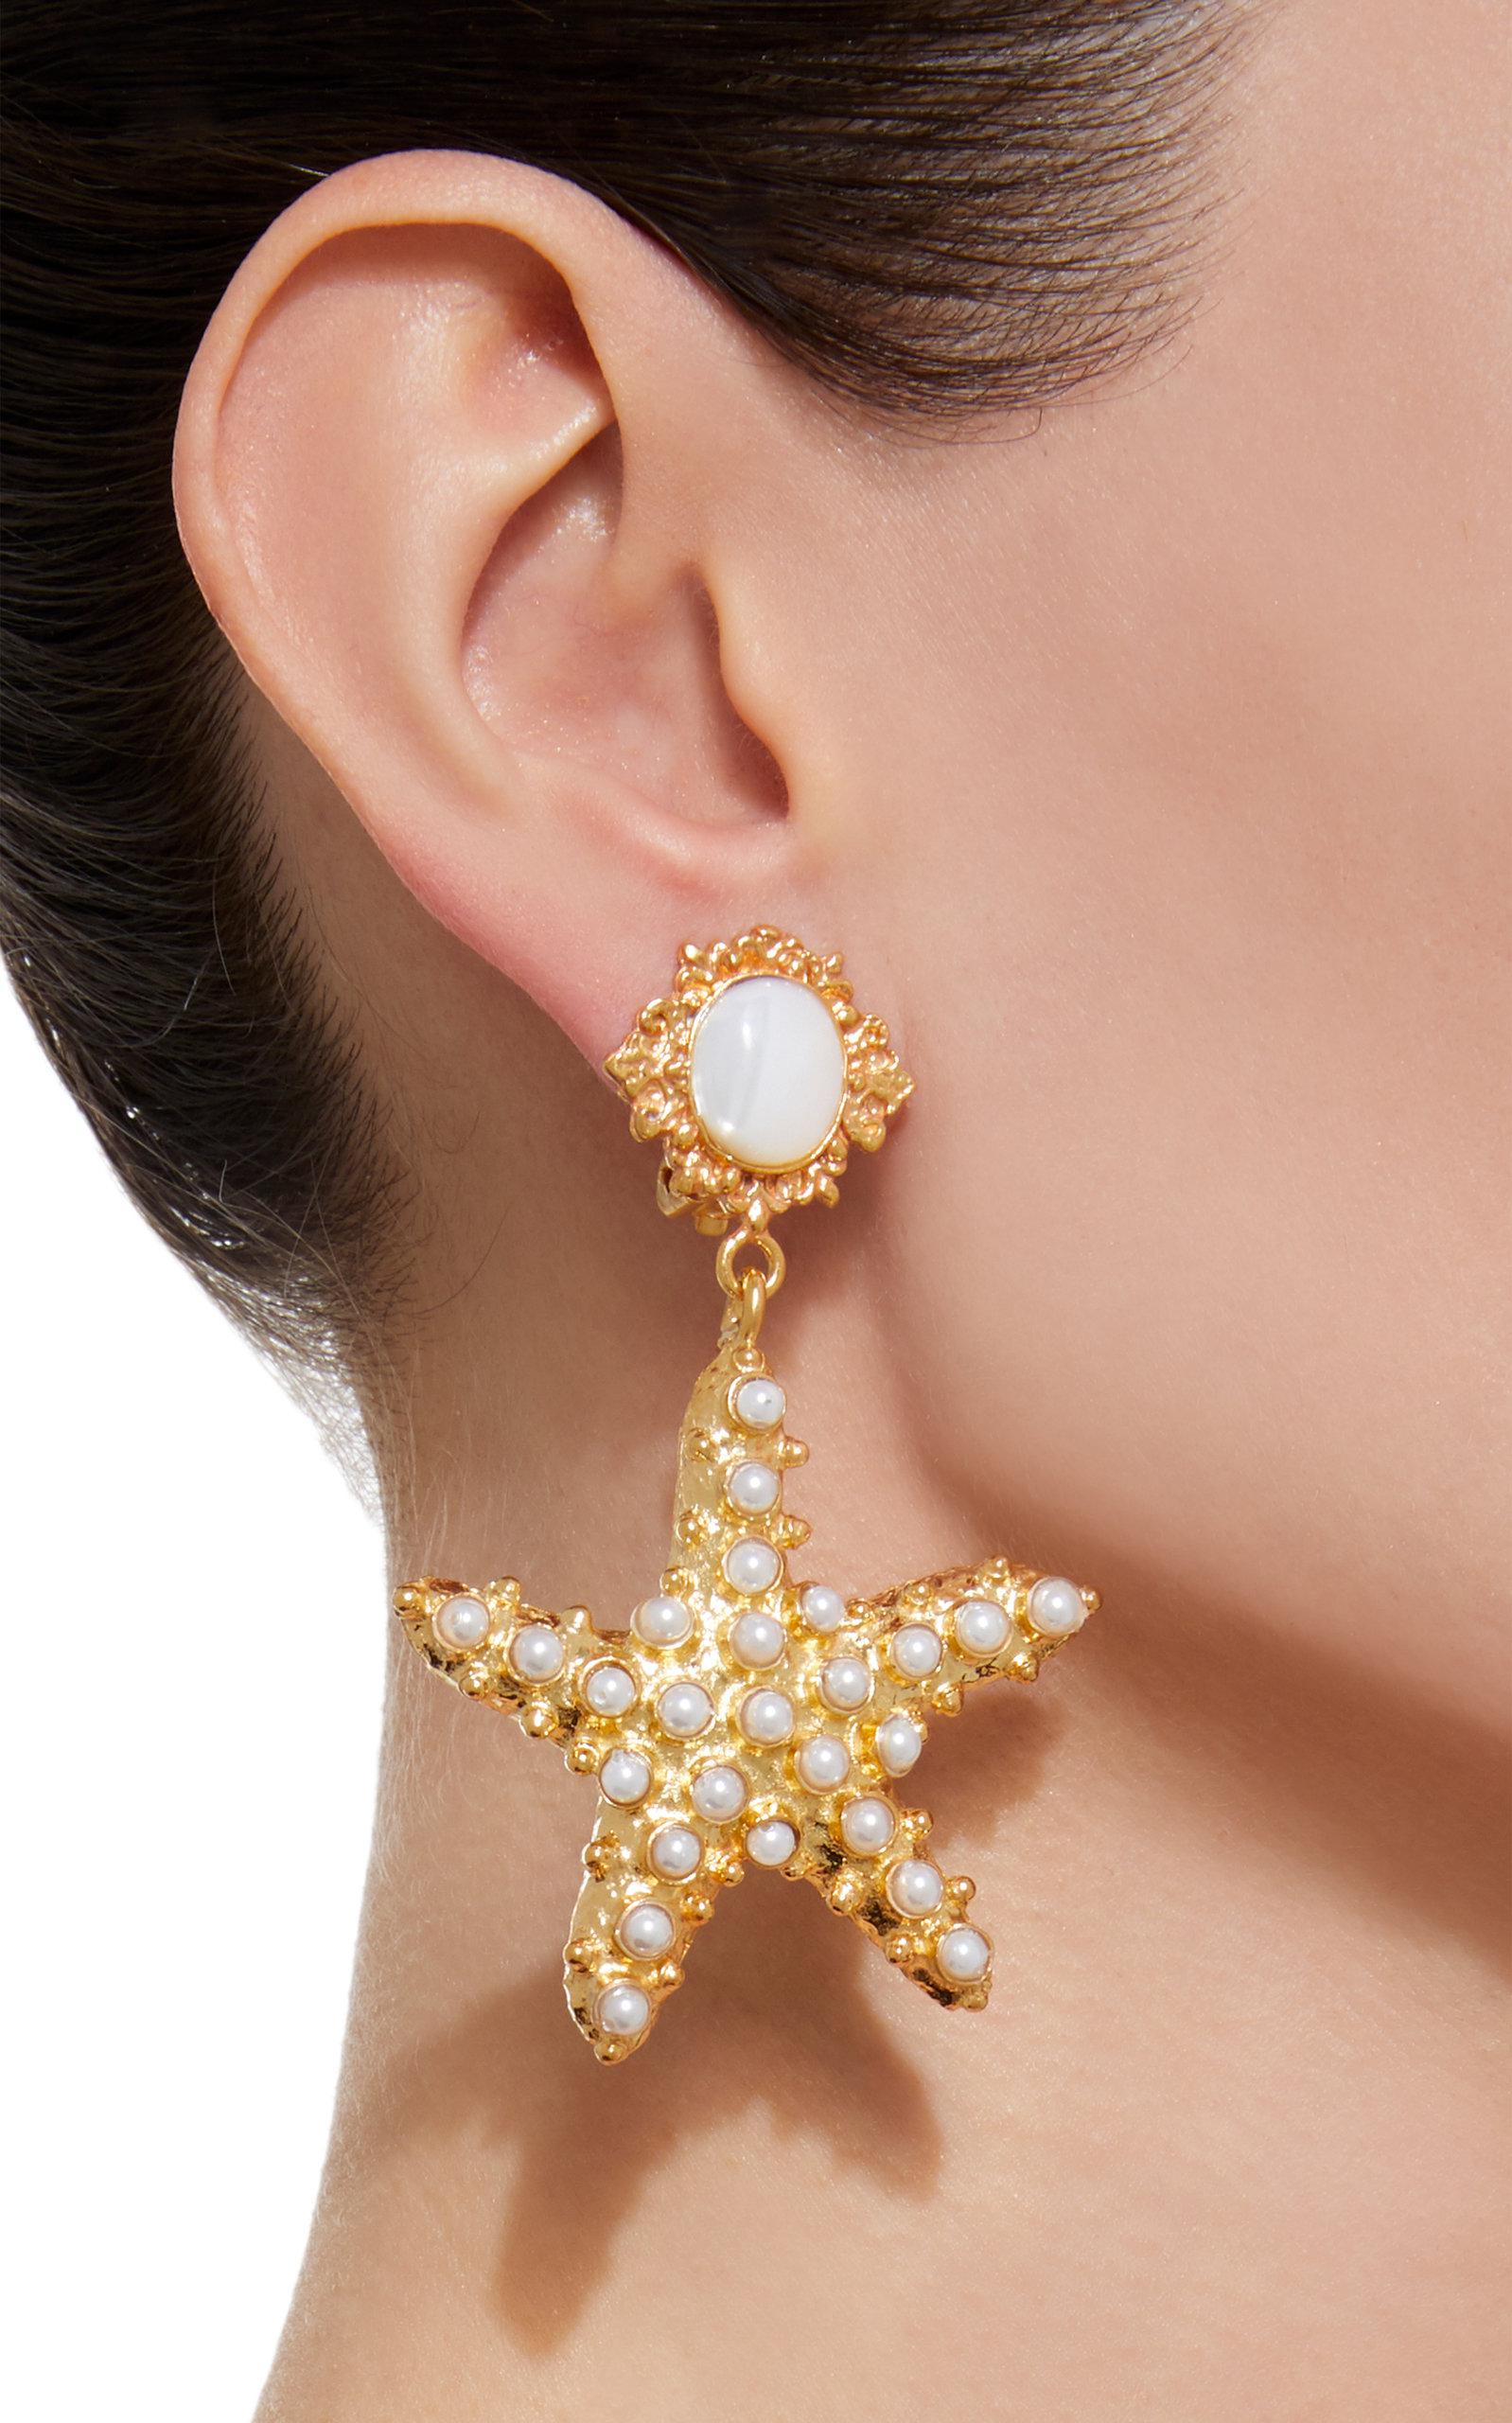 Christie Nicolaides Synthetic Sofia Moonstone Earrings in White - Lyst